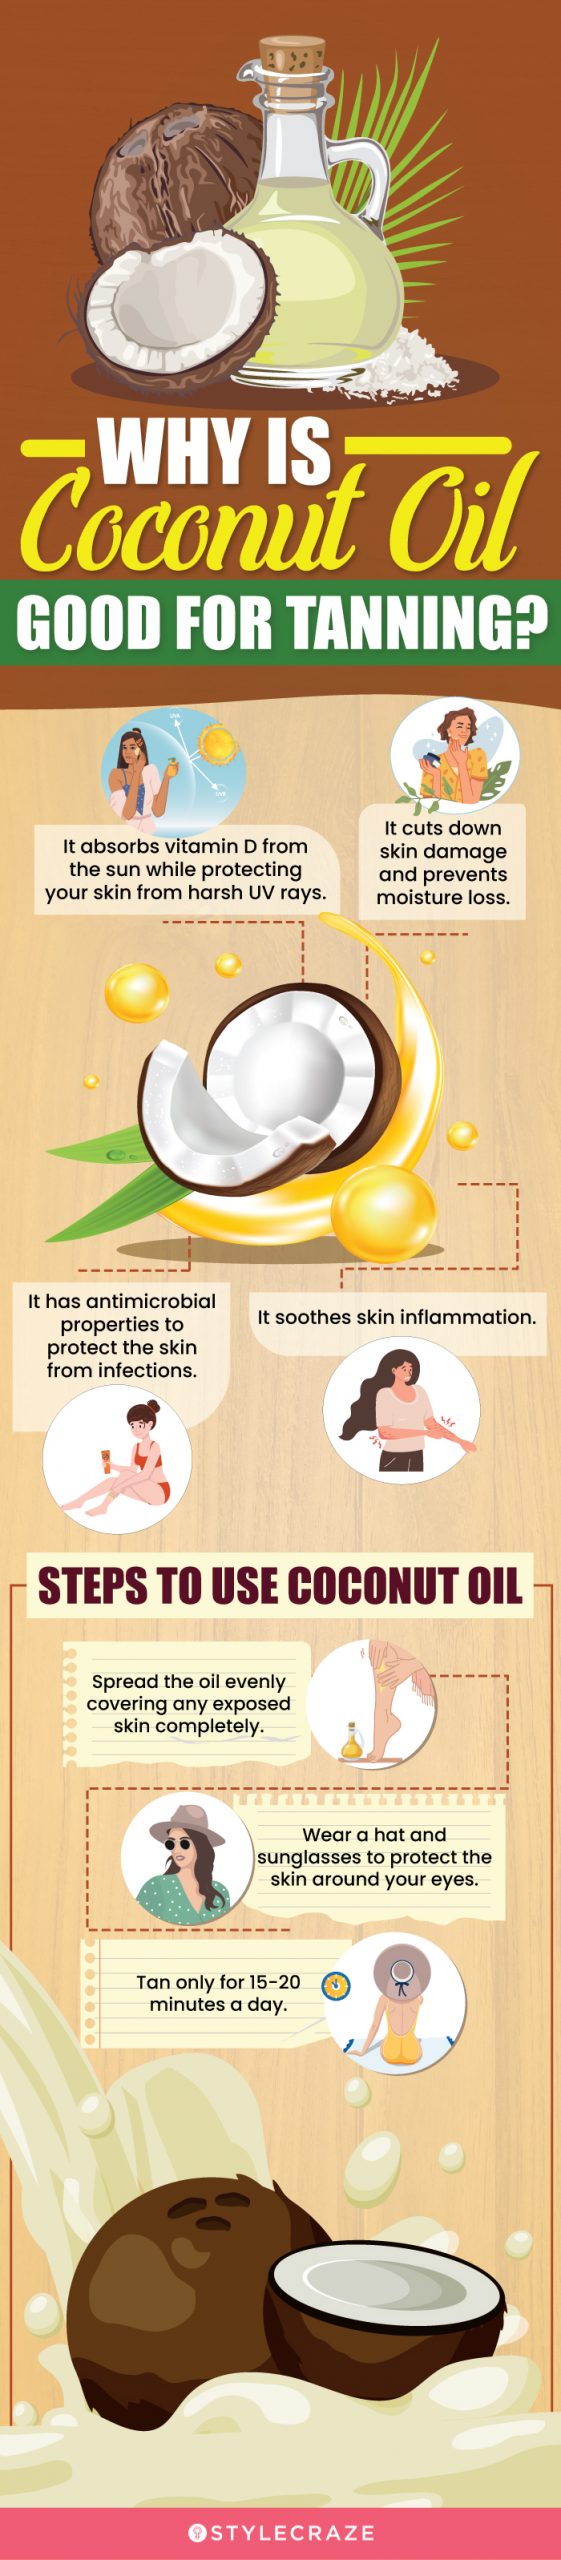 why is coconut oil good for tanning [infographic]